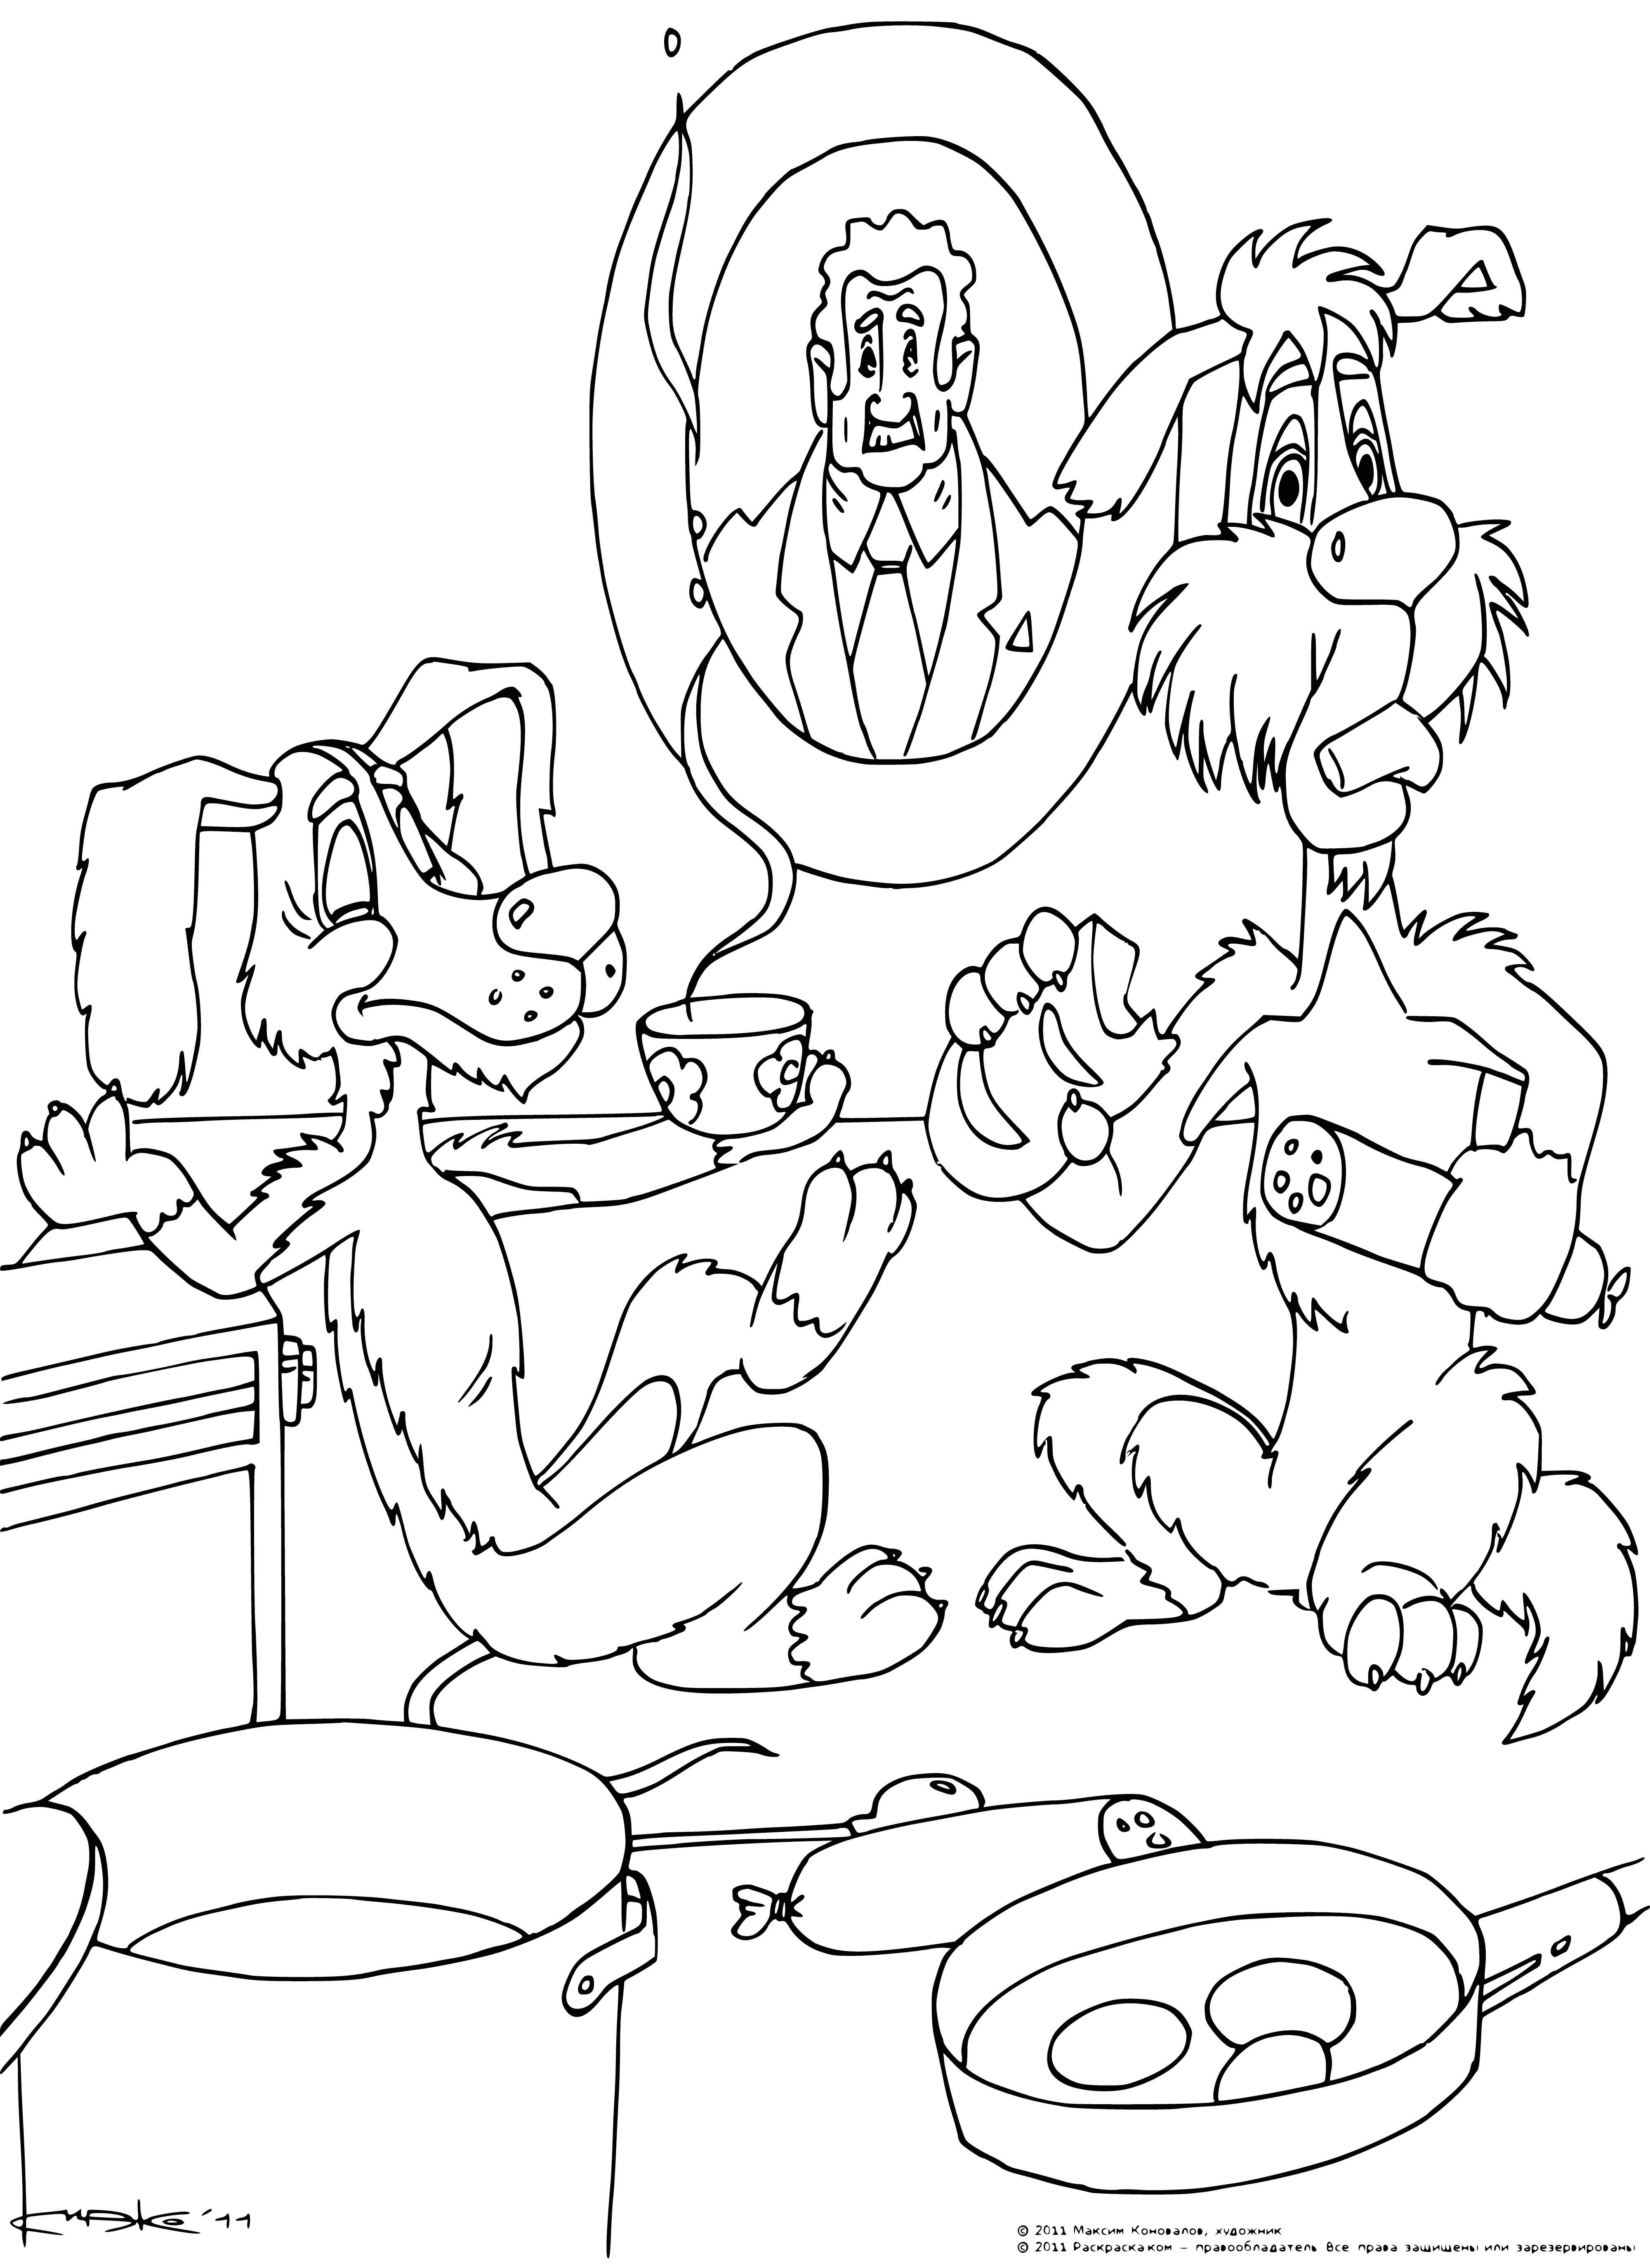 coloring page: Bobik & Barbos sit in a lux living room, surrounded by a rug, comfy chair, and vase of flowers- it's clear Barbos is living the good life!